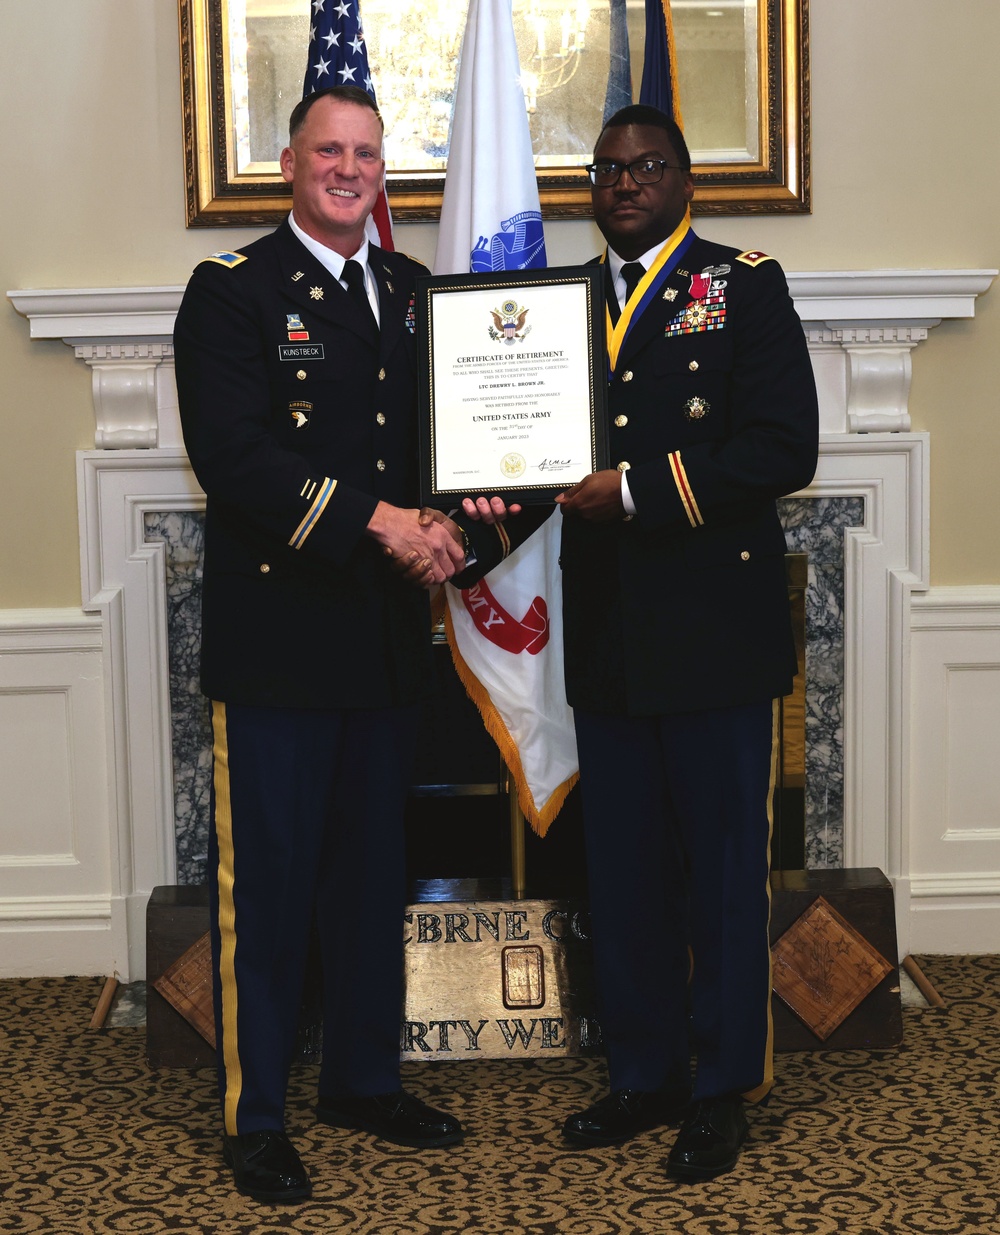 Senior 20th CBRNE Command logistics officer retires after 26 years in U.S. Army